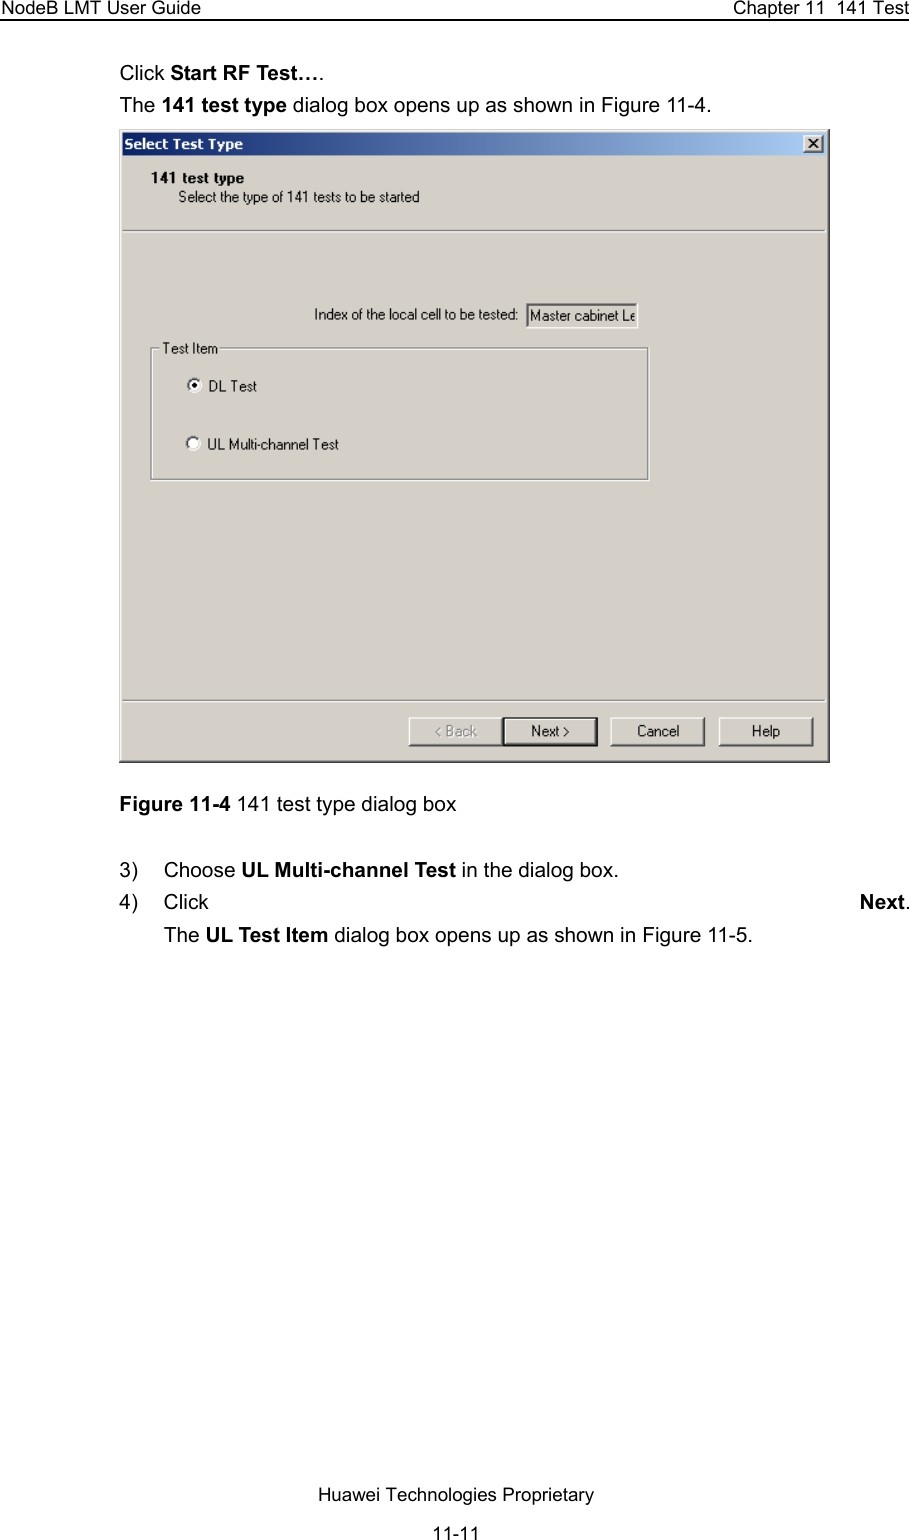 NodeB LMT User Guide  Chapter 11  141 Test Click Start RF Test….  The 141 test type dialog box opens up as shown in Figure 11-4.                    Figure 11-4 141 test type dialog box 3) Choose UL Multi-channel Test in the dialog box.  4) Click  Next.  The UL Test Item dialog box opens up as shown in Figure 11-5. Huawei Technologies Proprietary 11-11 